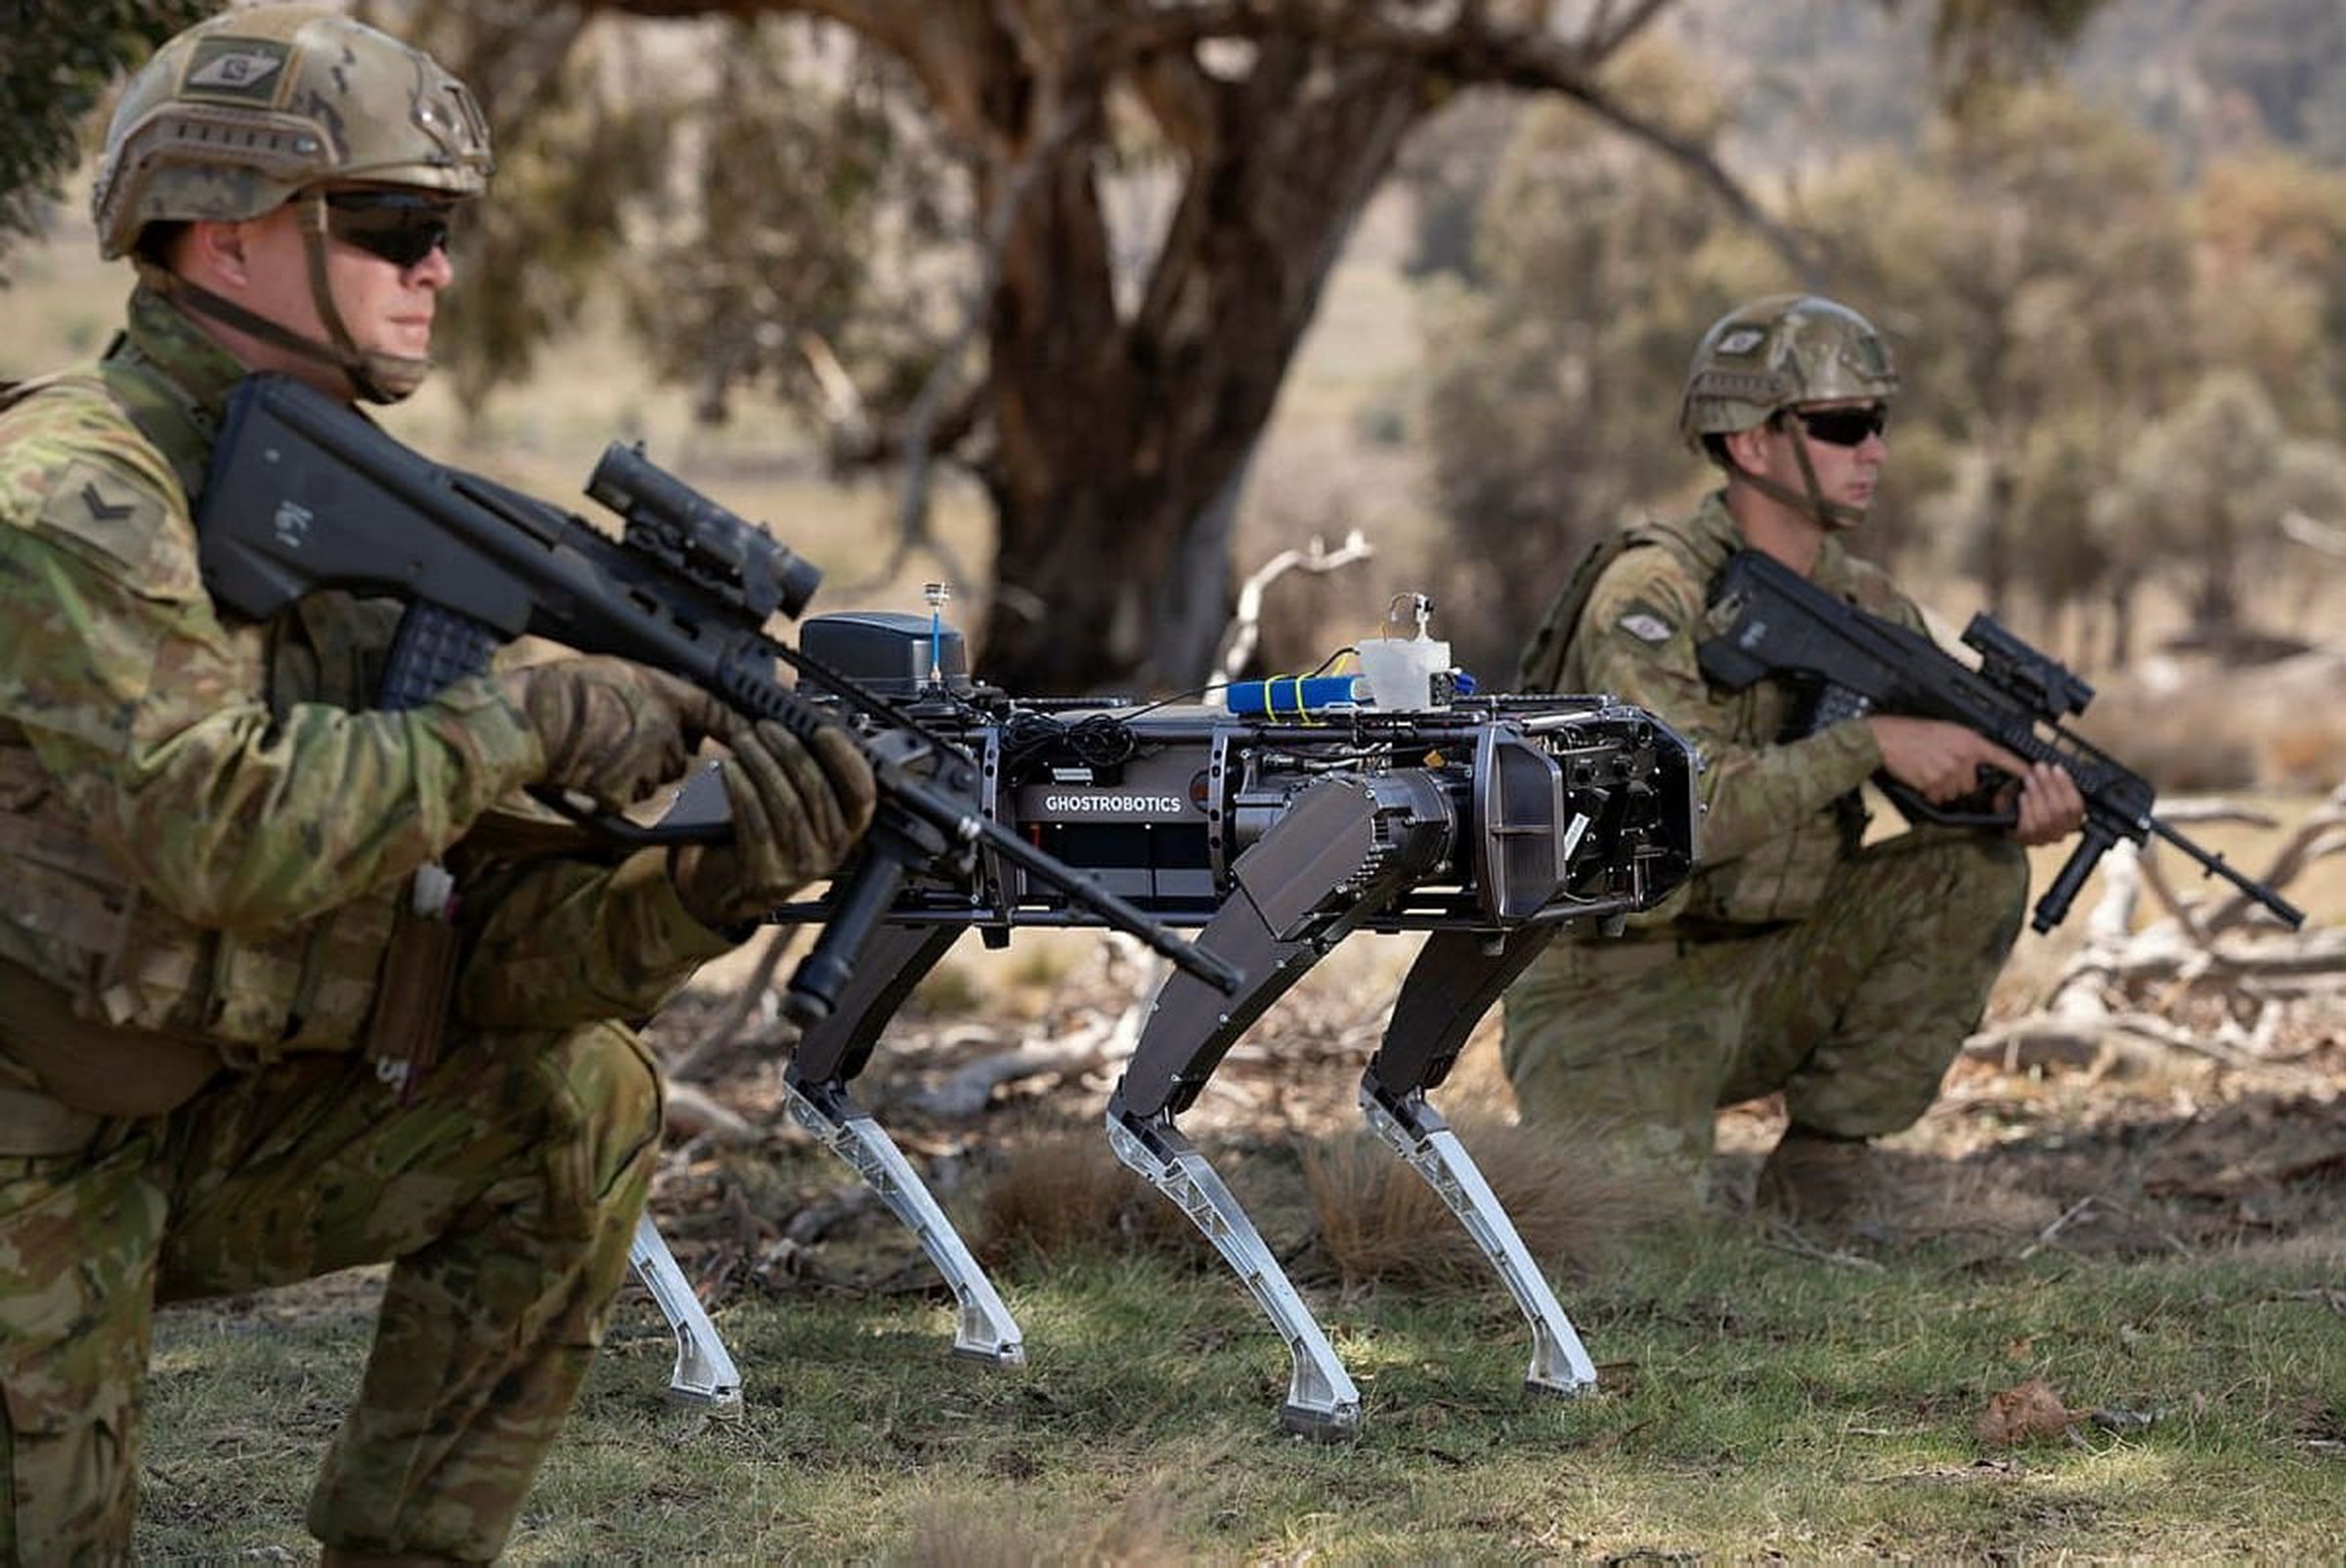 Unlike the better-known Boston Dynamics, Ghost Robotics seems eager to find military customers for its quadrupedal machines. 